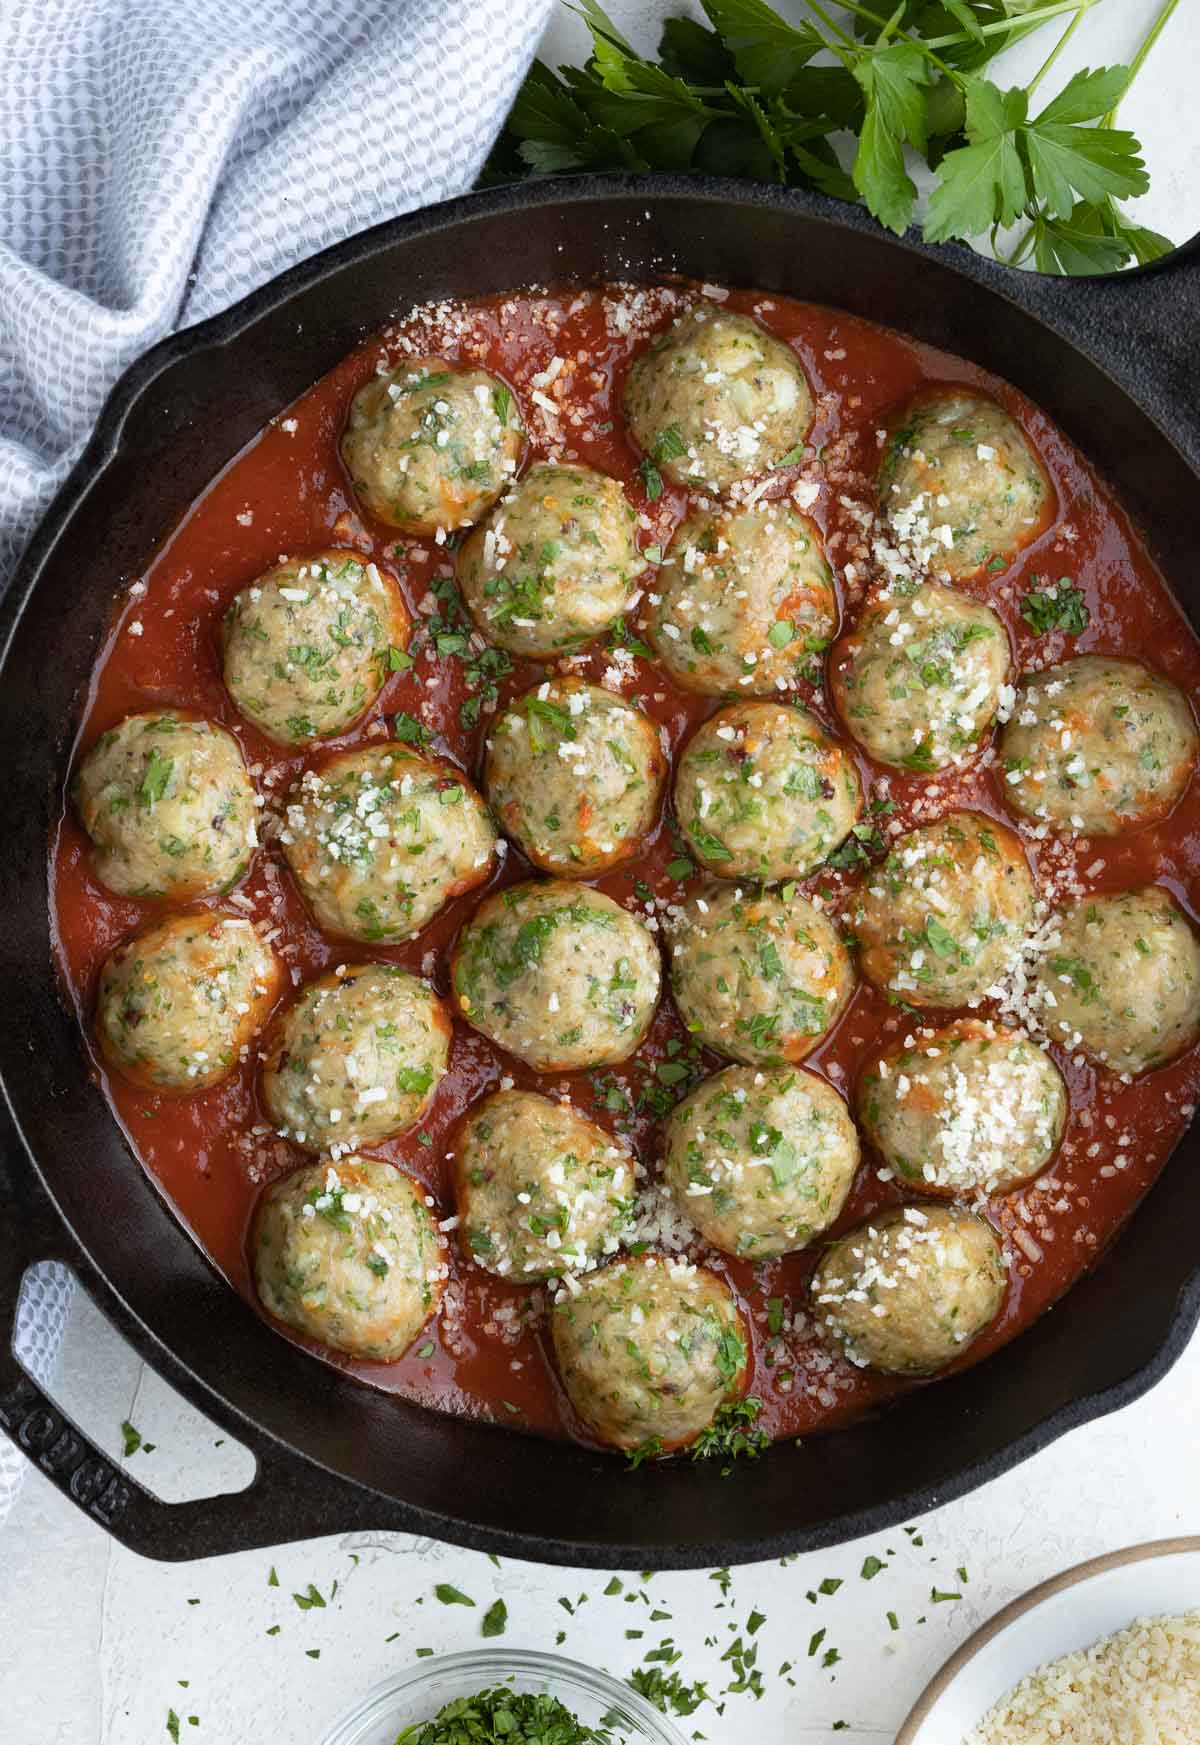 Baked turkey meatballs with red marinara sauce in a cast iron skillet.